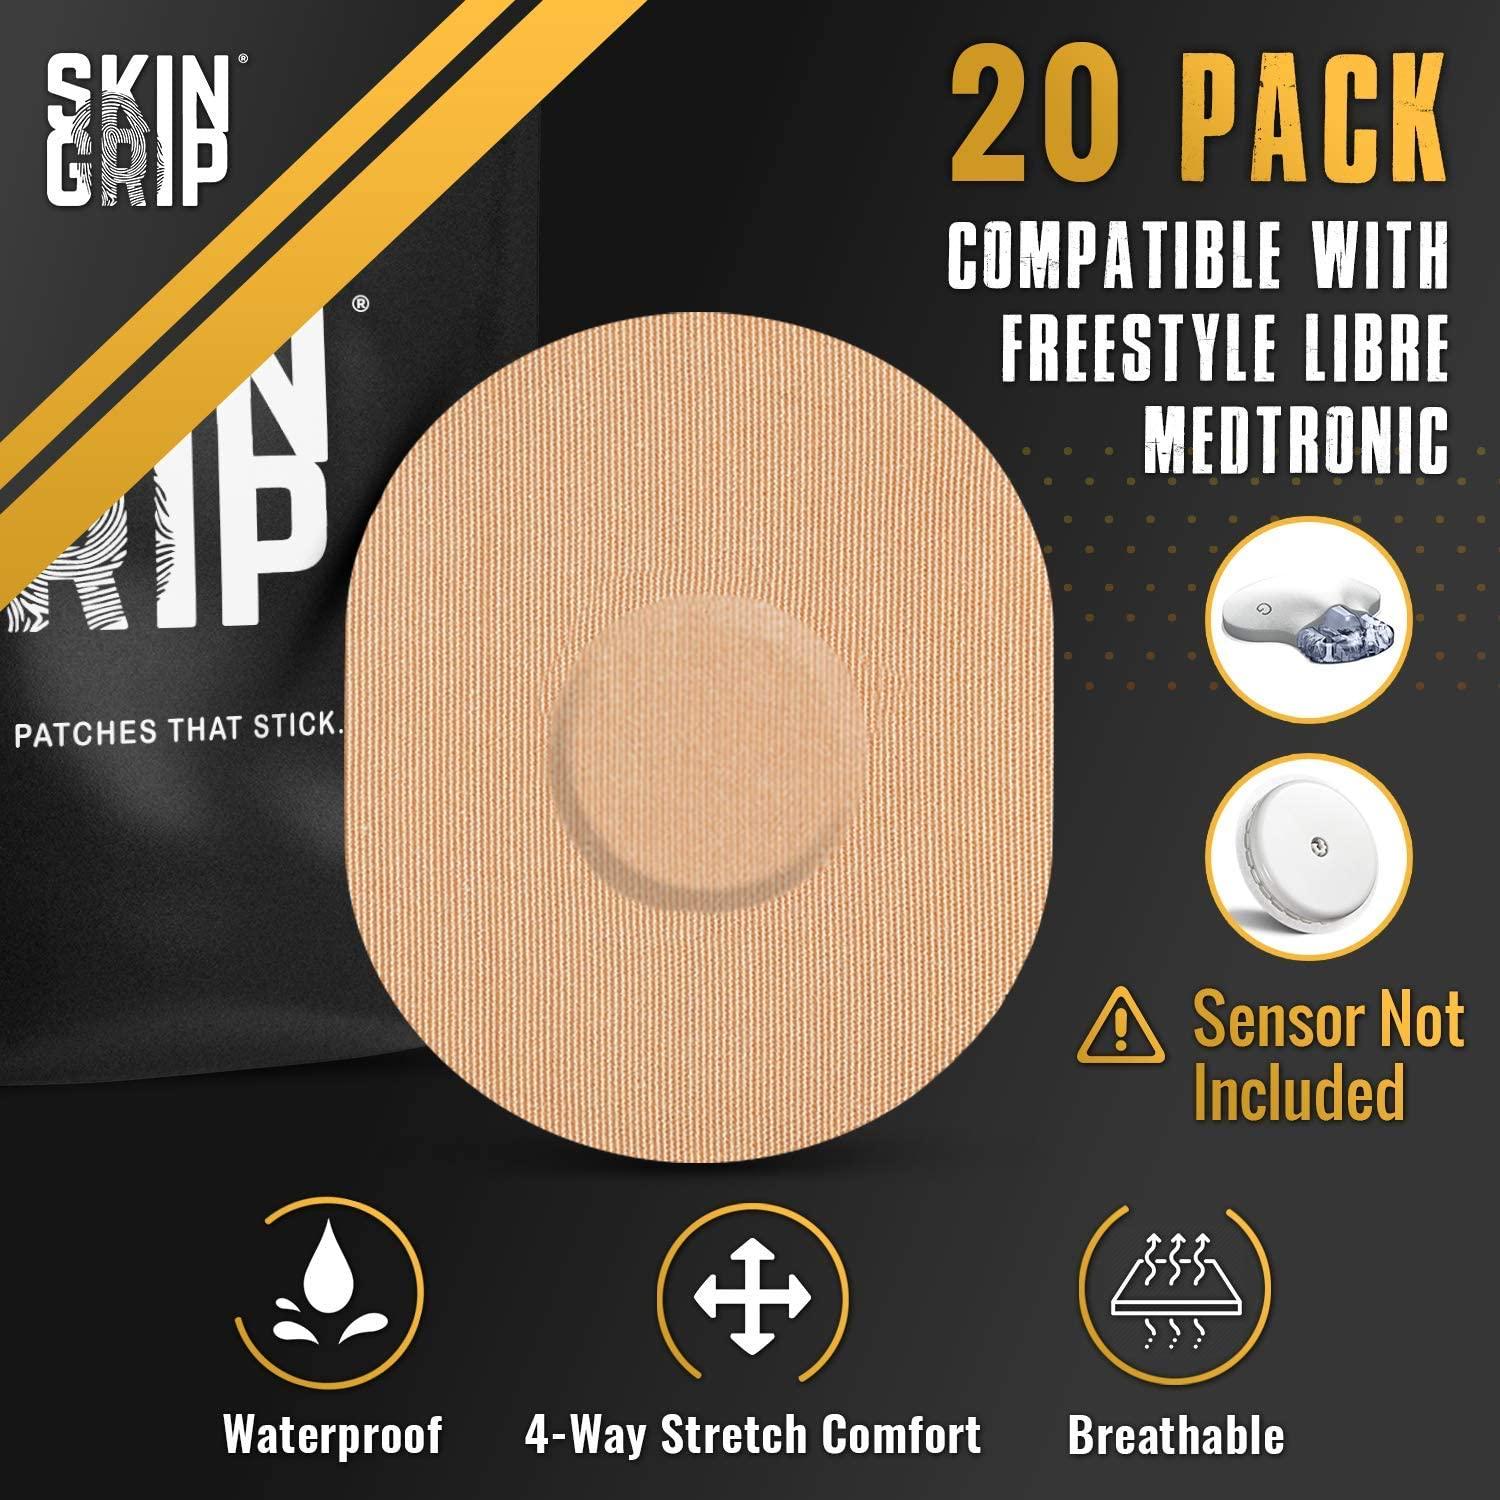 Skin Grip Original - Freestyle Libre 2 Adhesive Patches - 20 Pack ...